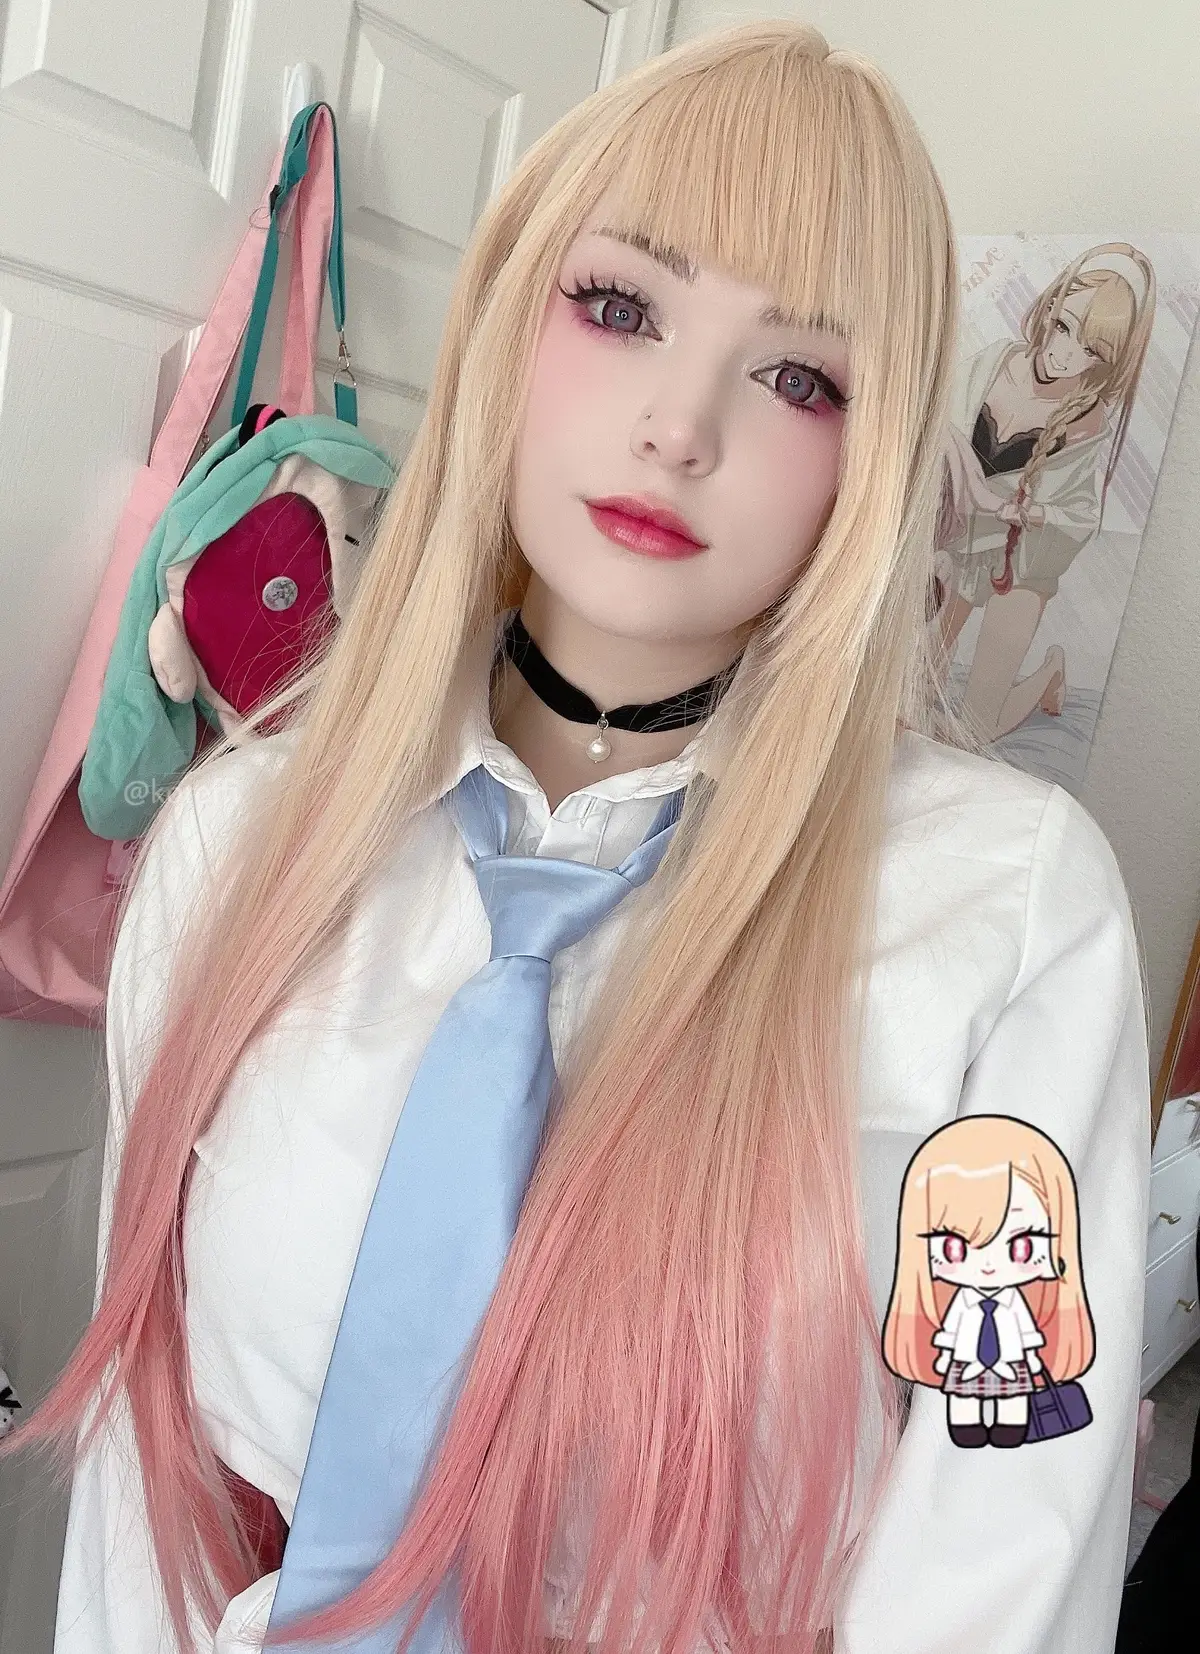 Any other my dress up darling cosplays i should do that i havent? ||#cosplay #cosplayer #animecosplay #mydressupdarling #mydressupdarlinganime #mydressupdarlingcosplay #marinkitagawa #marinkitagawacosplay#その着せ替え人形は恋をする #sonobisquedollwakoiwosuru 